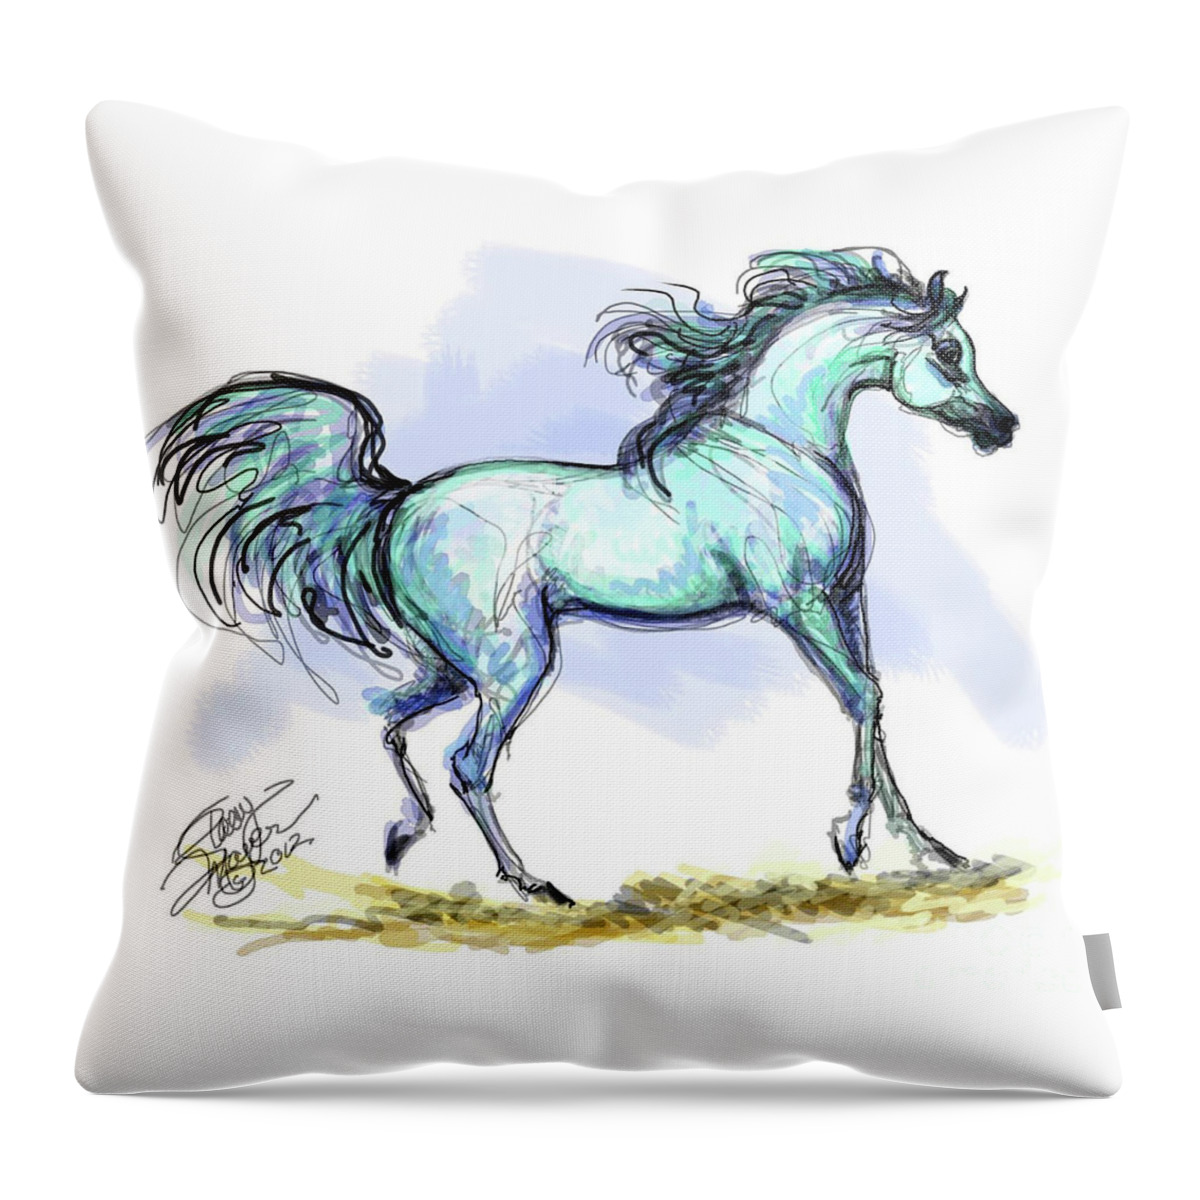 Equestrian Art Throw Pillow featuring the digital art Grey Arabian Stallion Watercolor by Stacey Mayer by Stacey Mayer